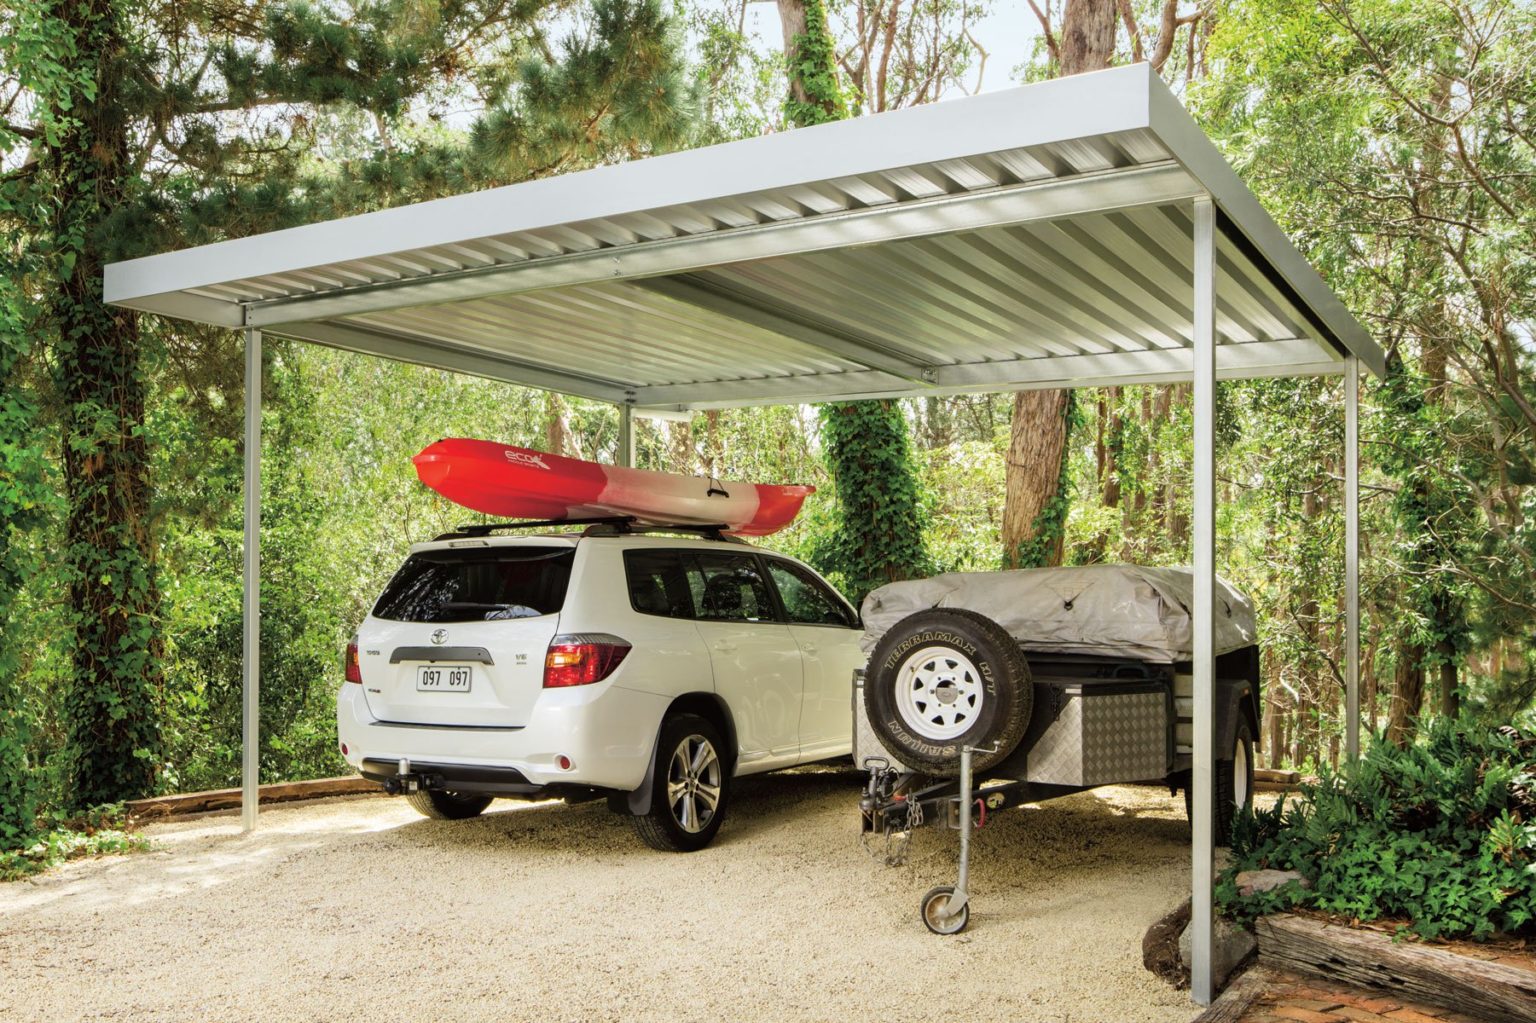 Carport and Awning Installer South Africa - Carport With Trailor In Driveway 1536x1023